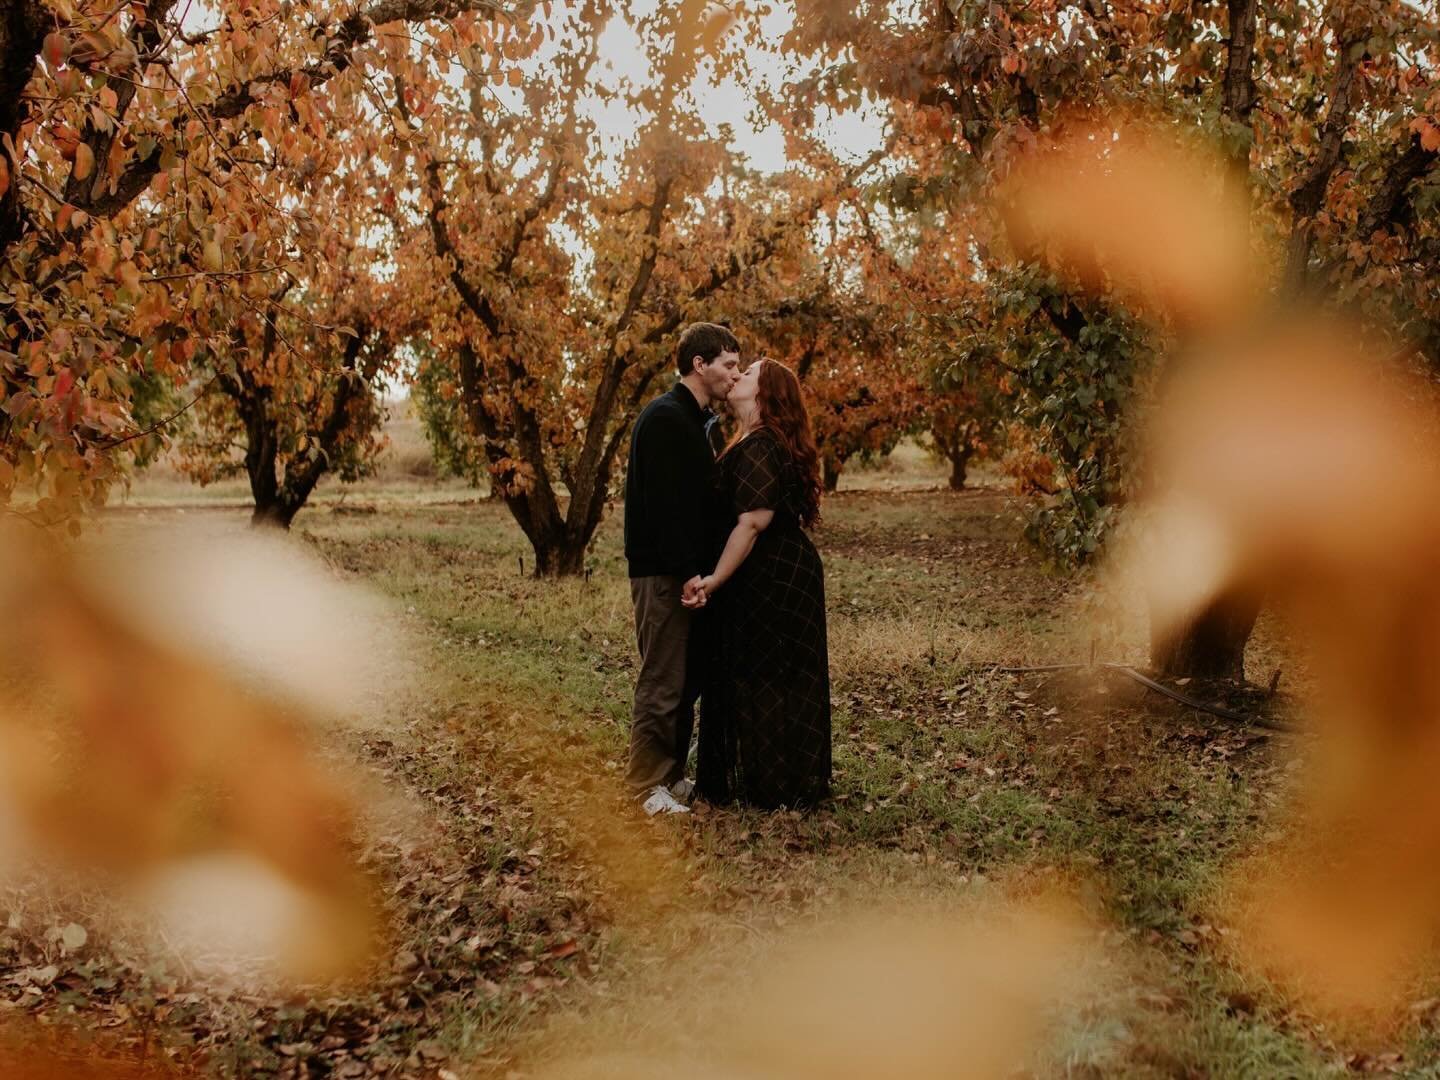 Emma + Matt, and all the glory of Autumn on the orchard last night for a seriously GORGEOUS pre-wedding session🍁🍂🍁 

It always starts with the couple telling me they are super awkward in photos and then 👆🏻😍🤗 The pics say it all! Emma and Matt 